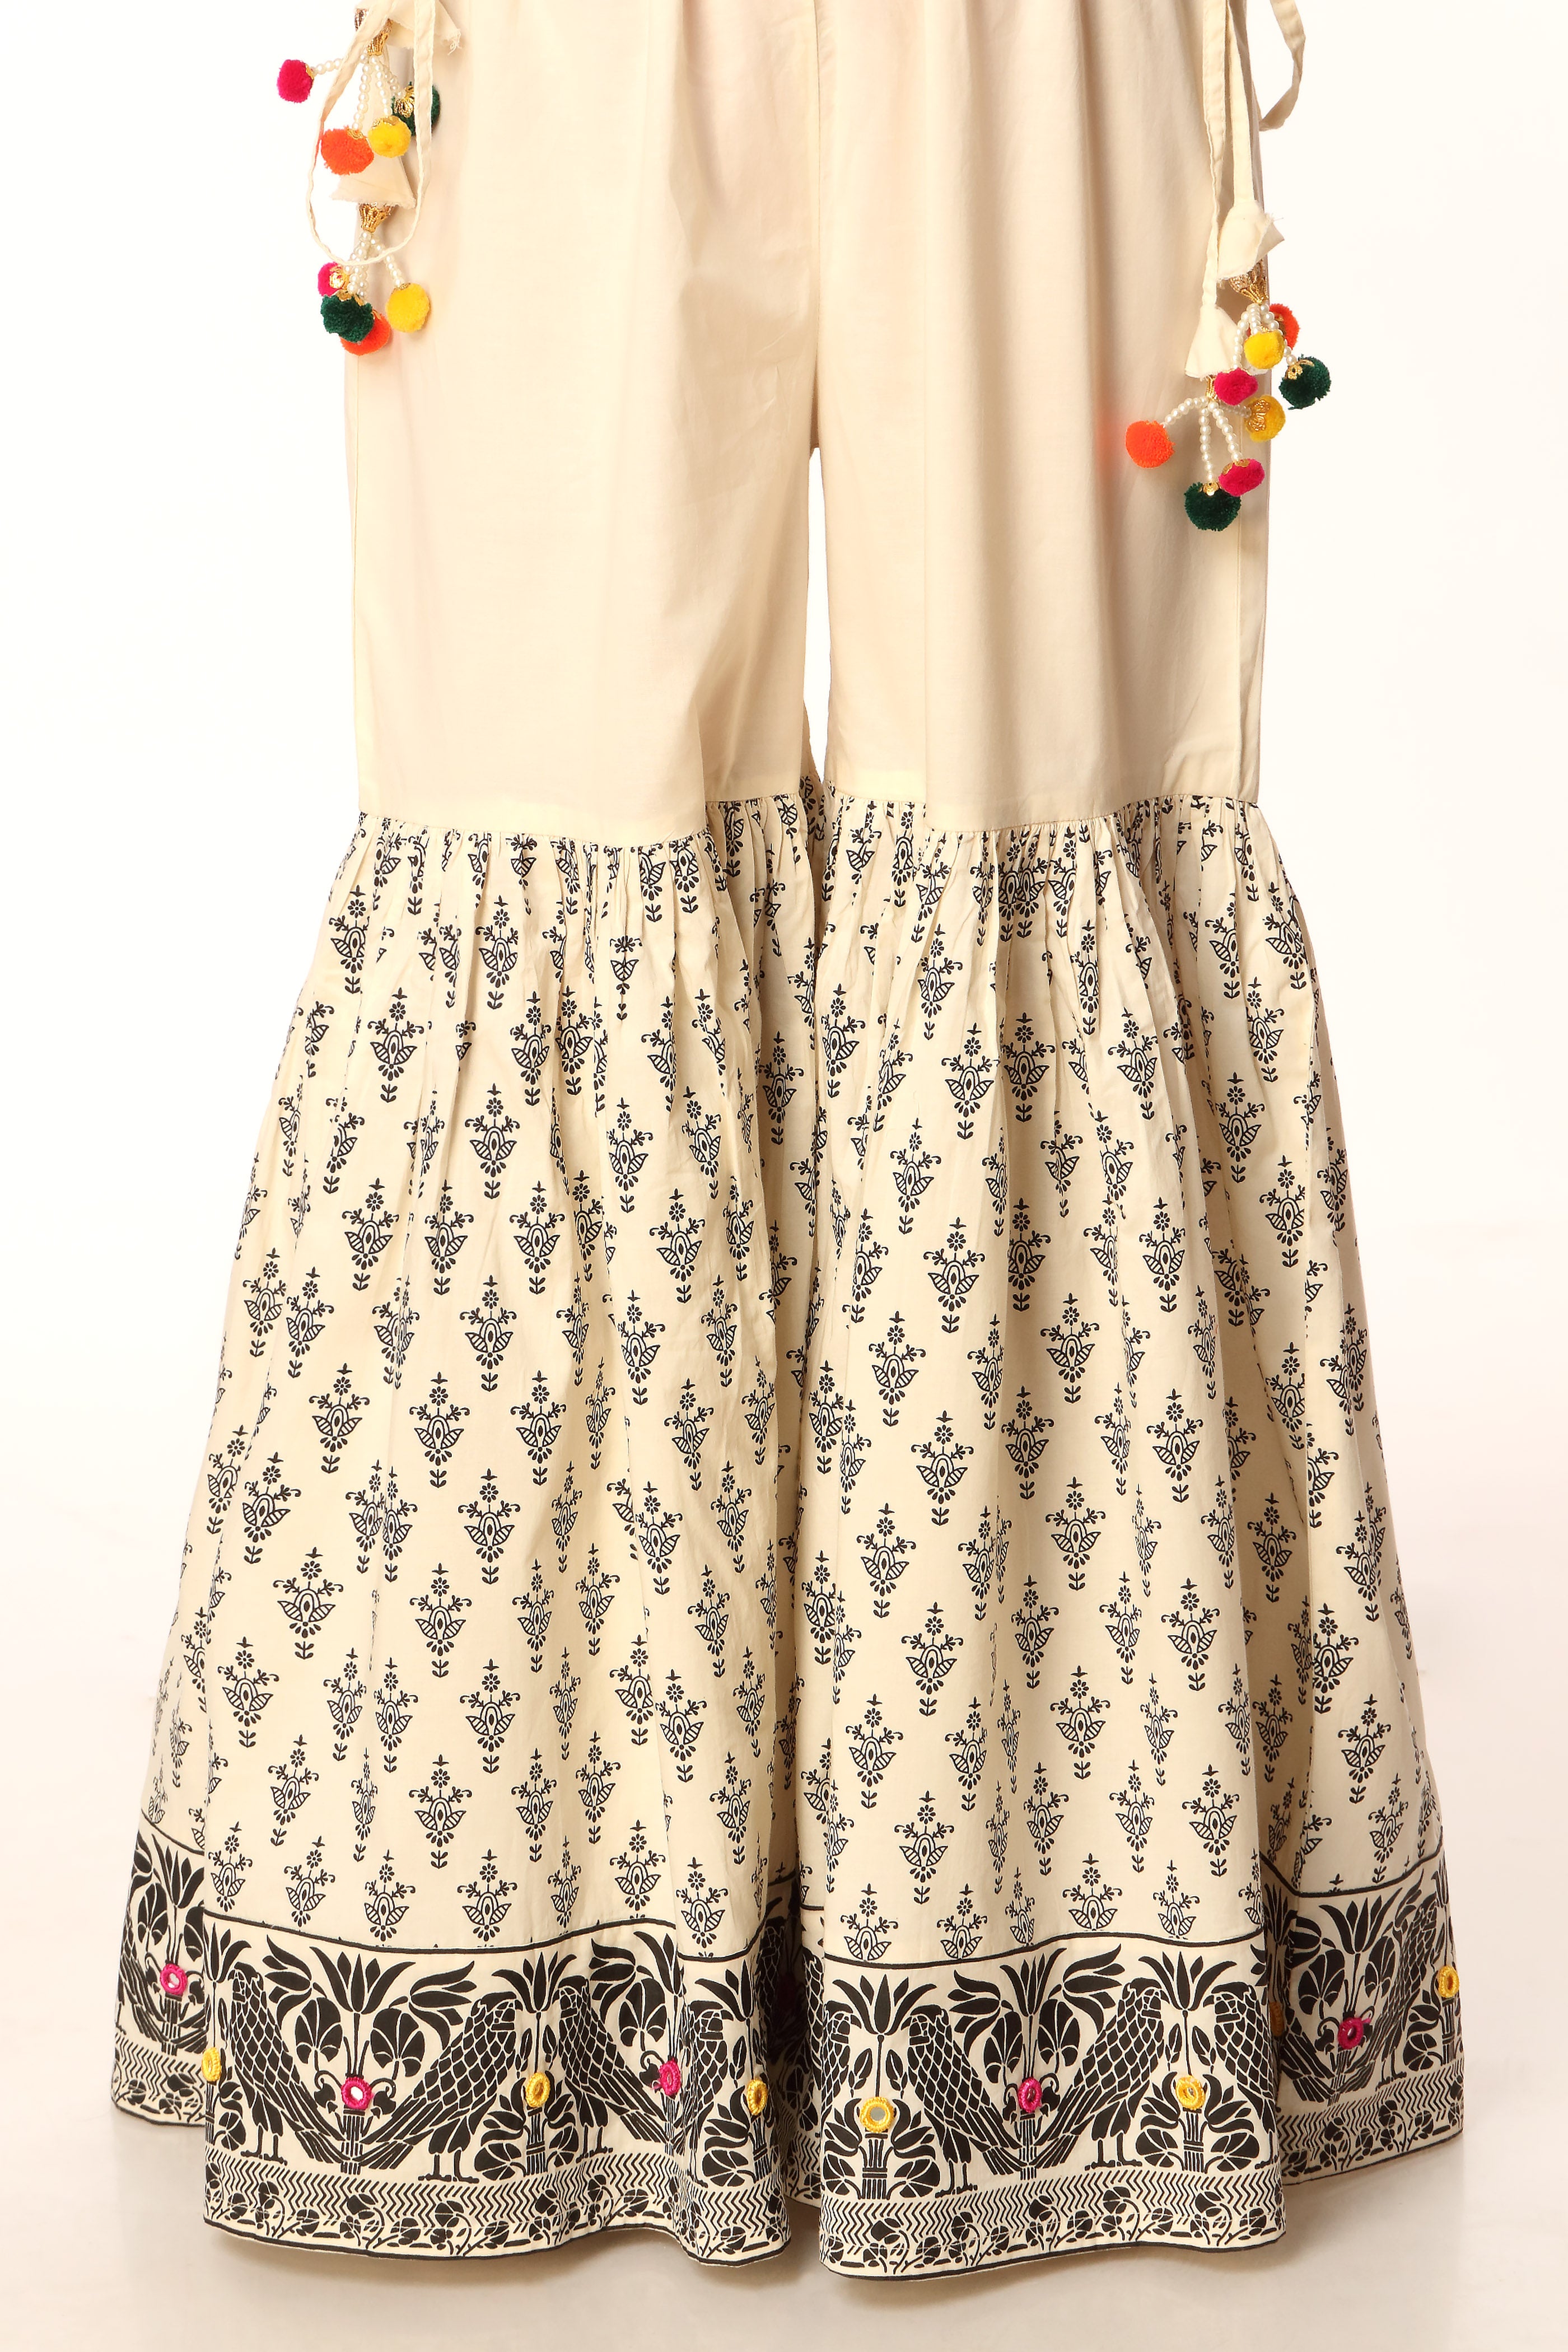 Black Booti 1 in Off White coloured Printed Lawn fabric